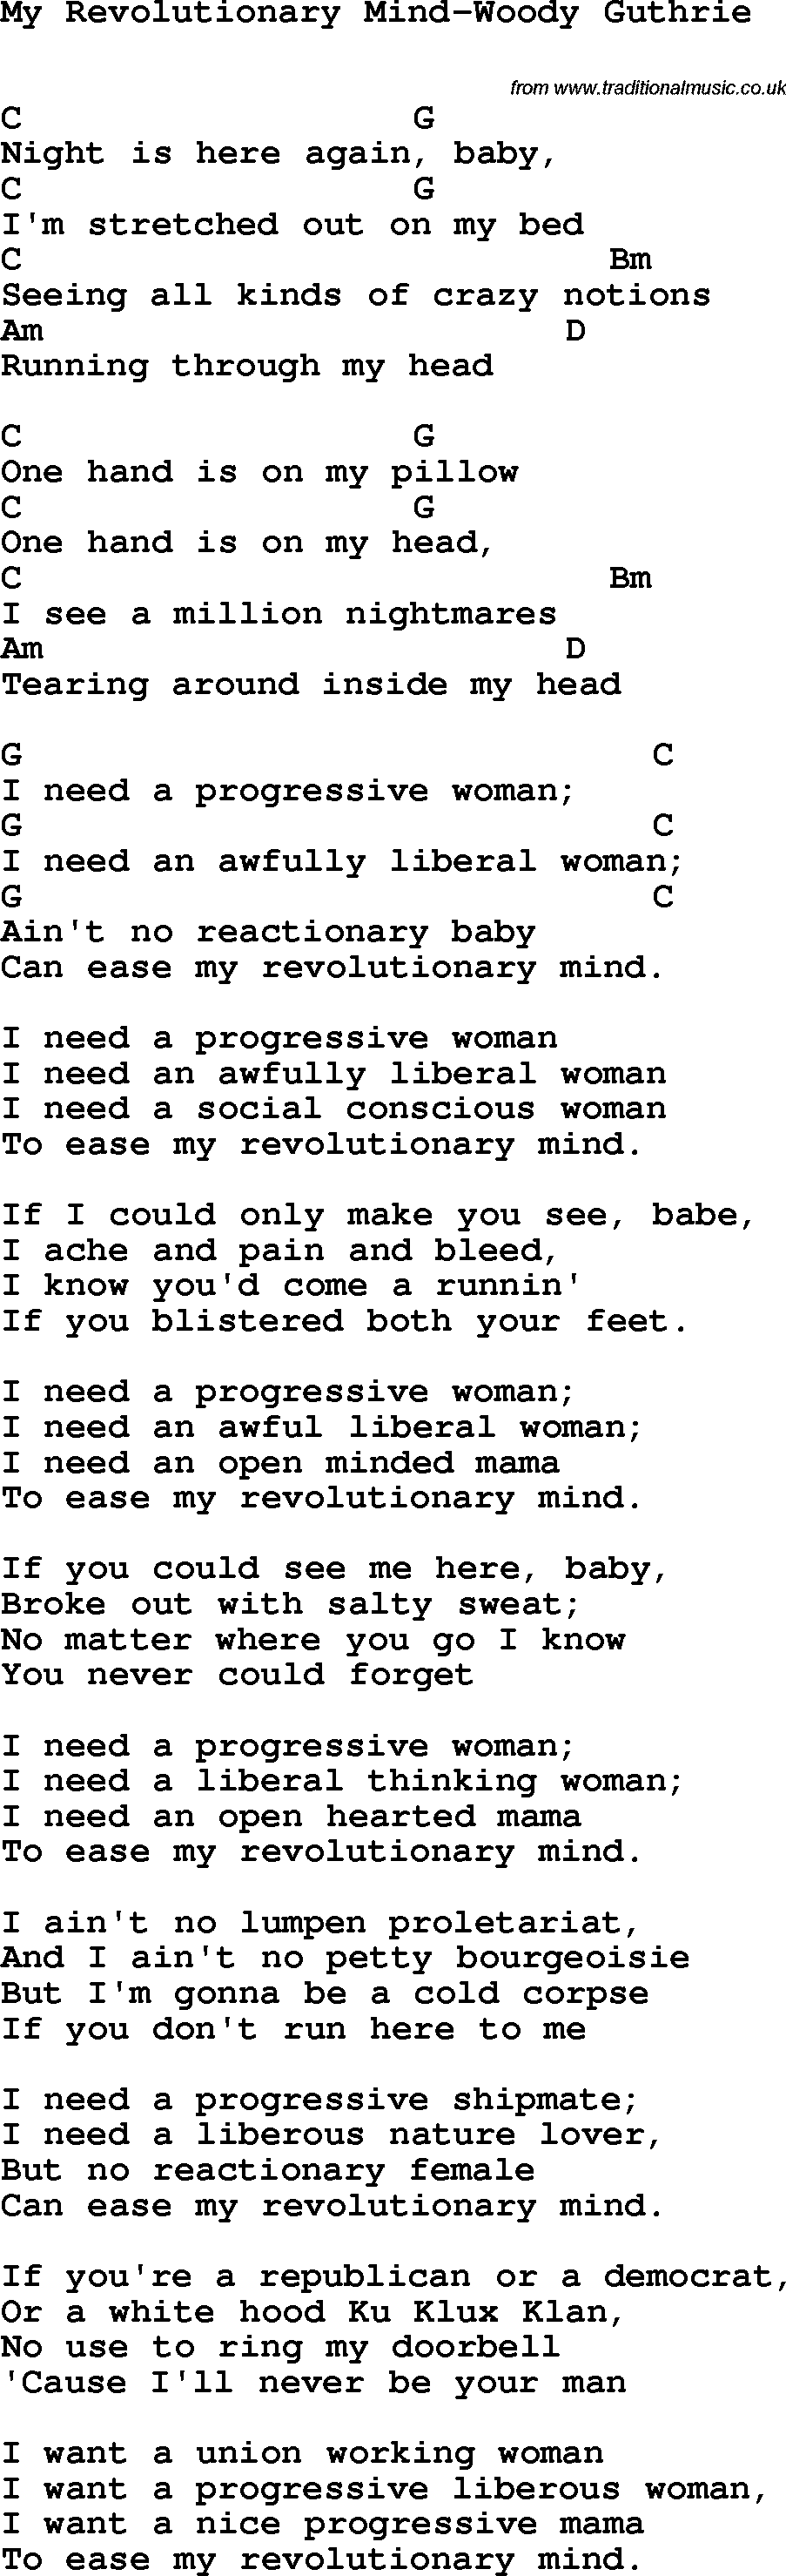 Protest Song My Revolutionary Mind-Woody Guthrie lyrics and chords